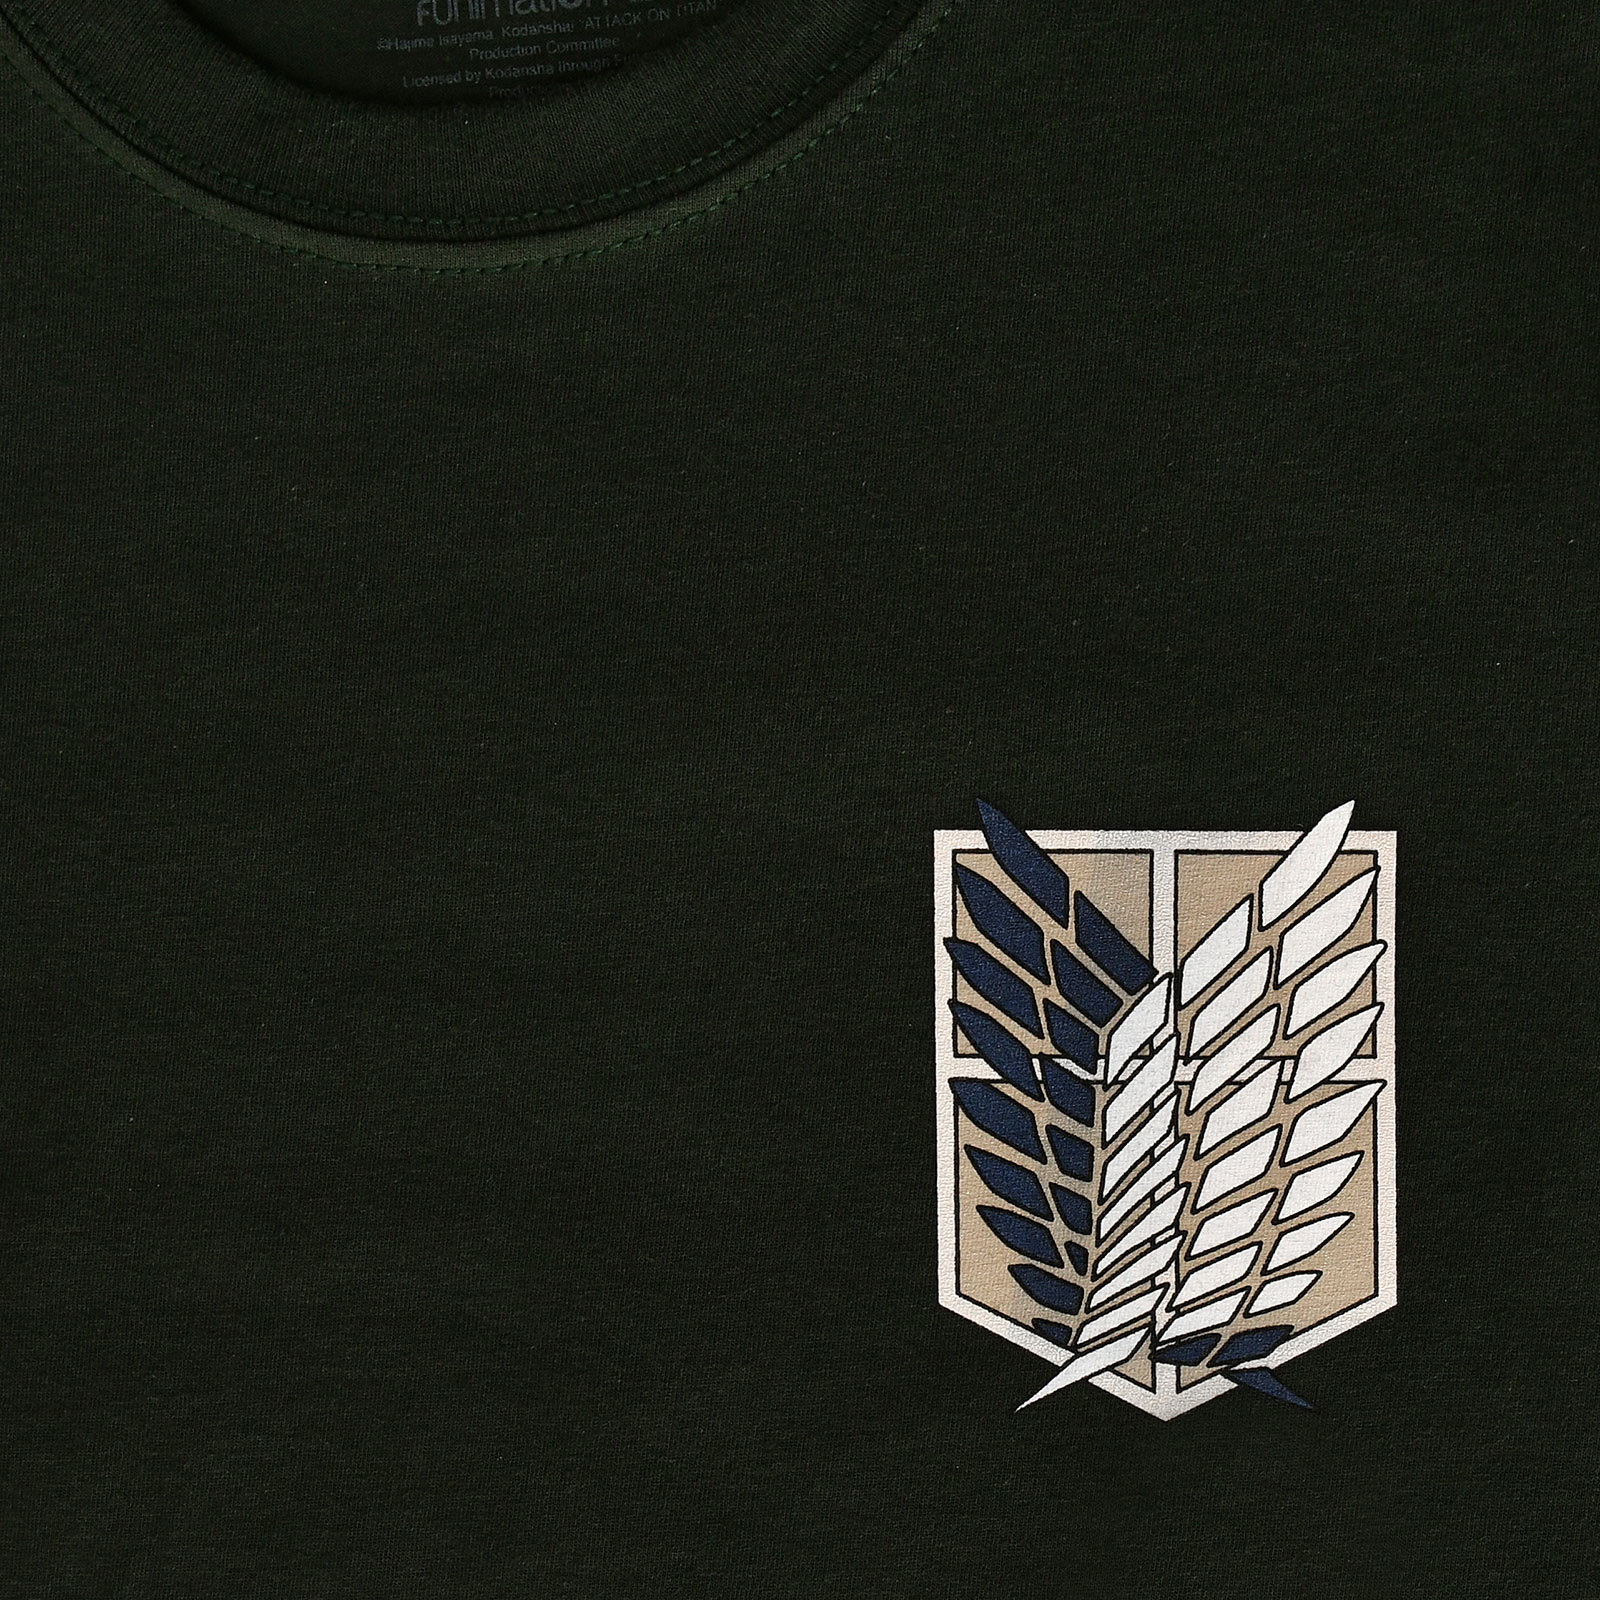 Attack on Titan - Survey Corps T-Shirt green